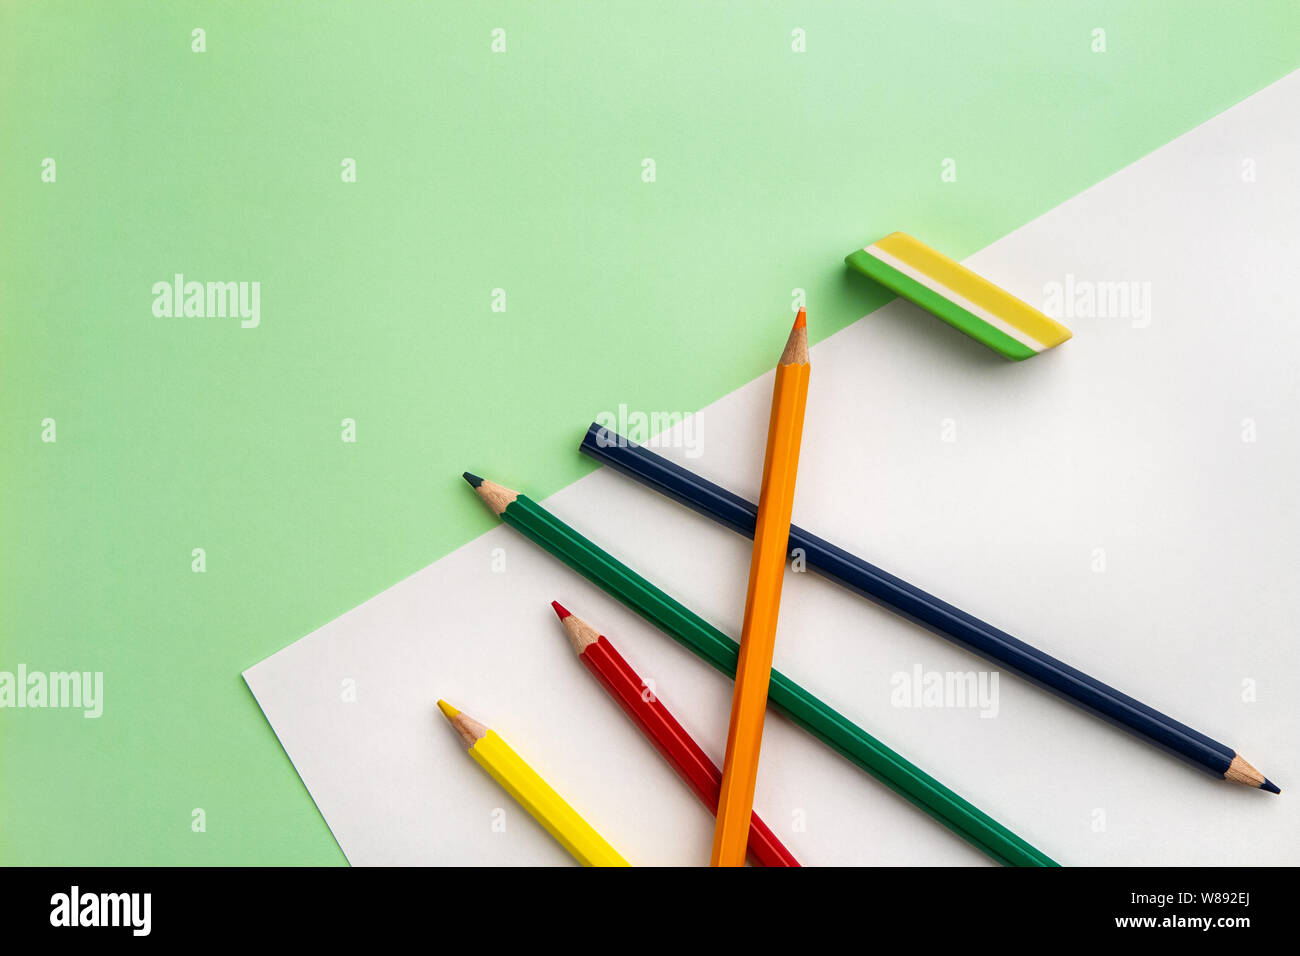 white sheet of paper, five pencils and an eraser on a light green paper background. Copyspace Stock Photo